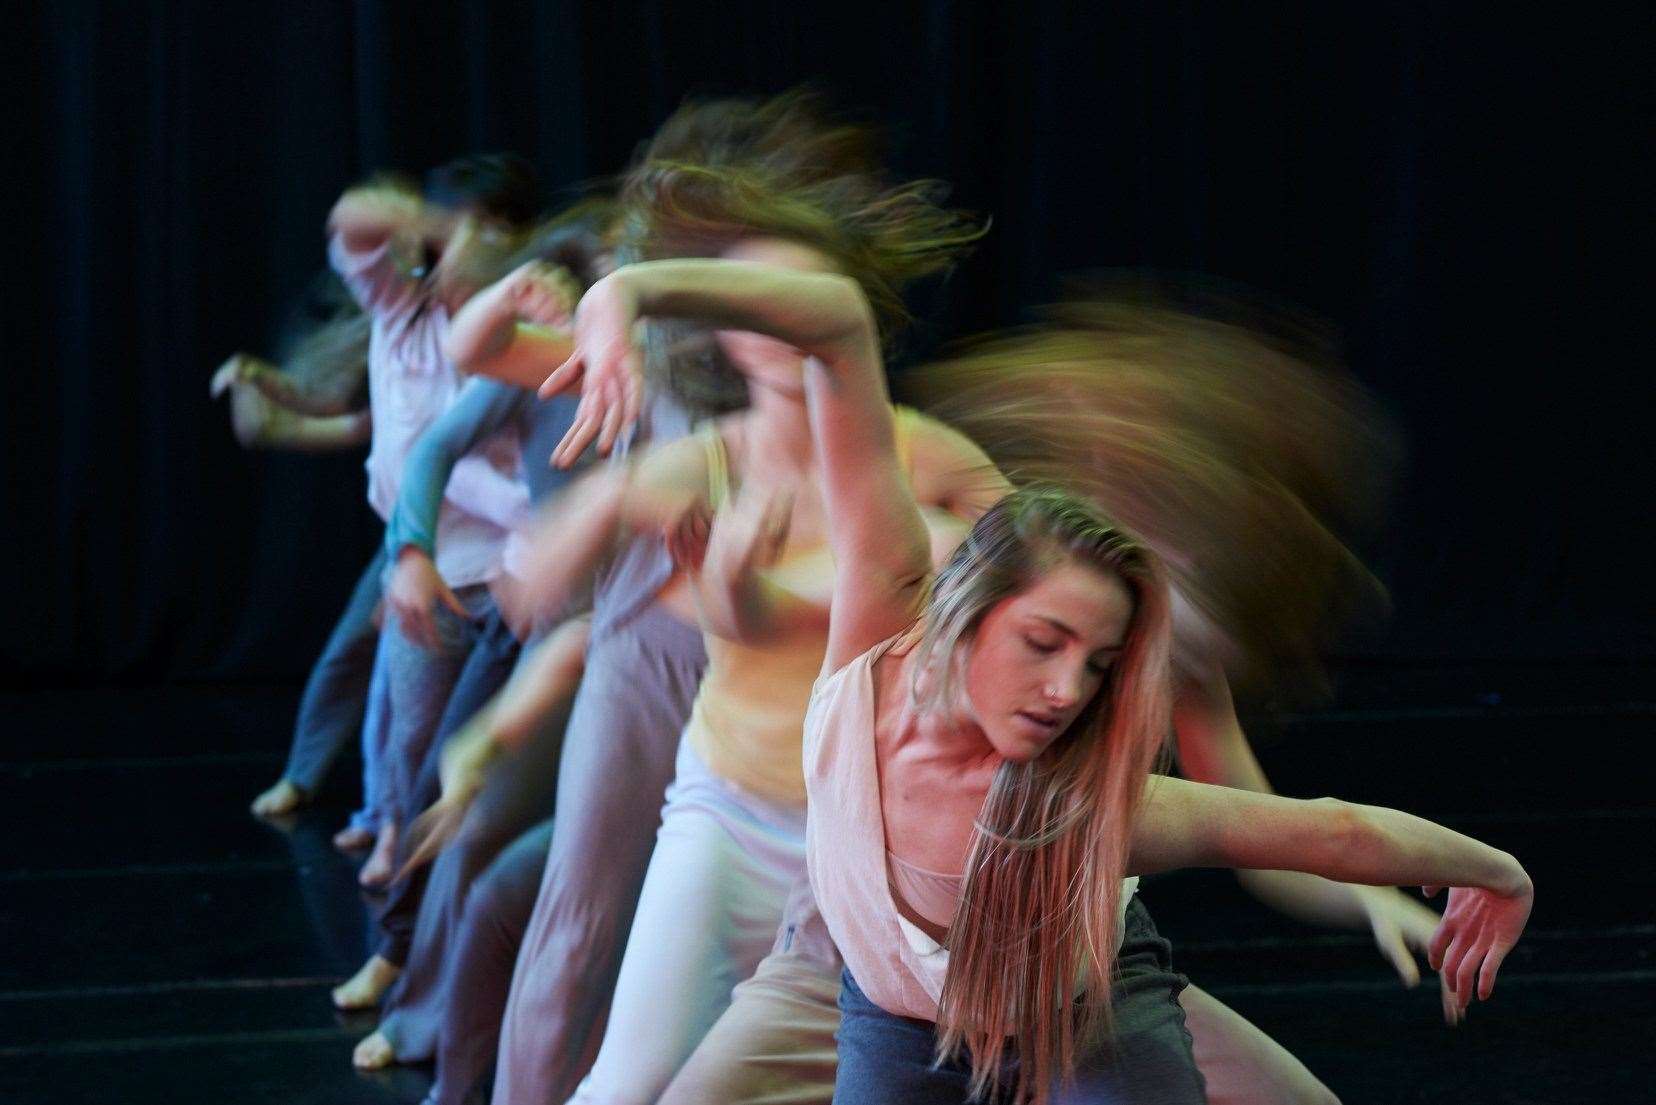 The dance company has performed globally and attracts students from around the world